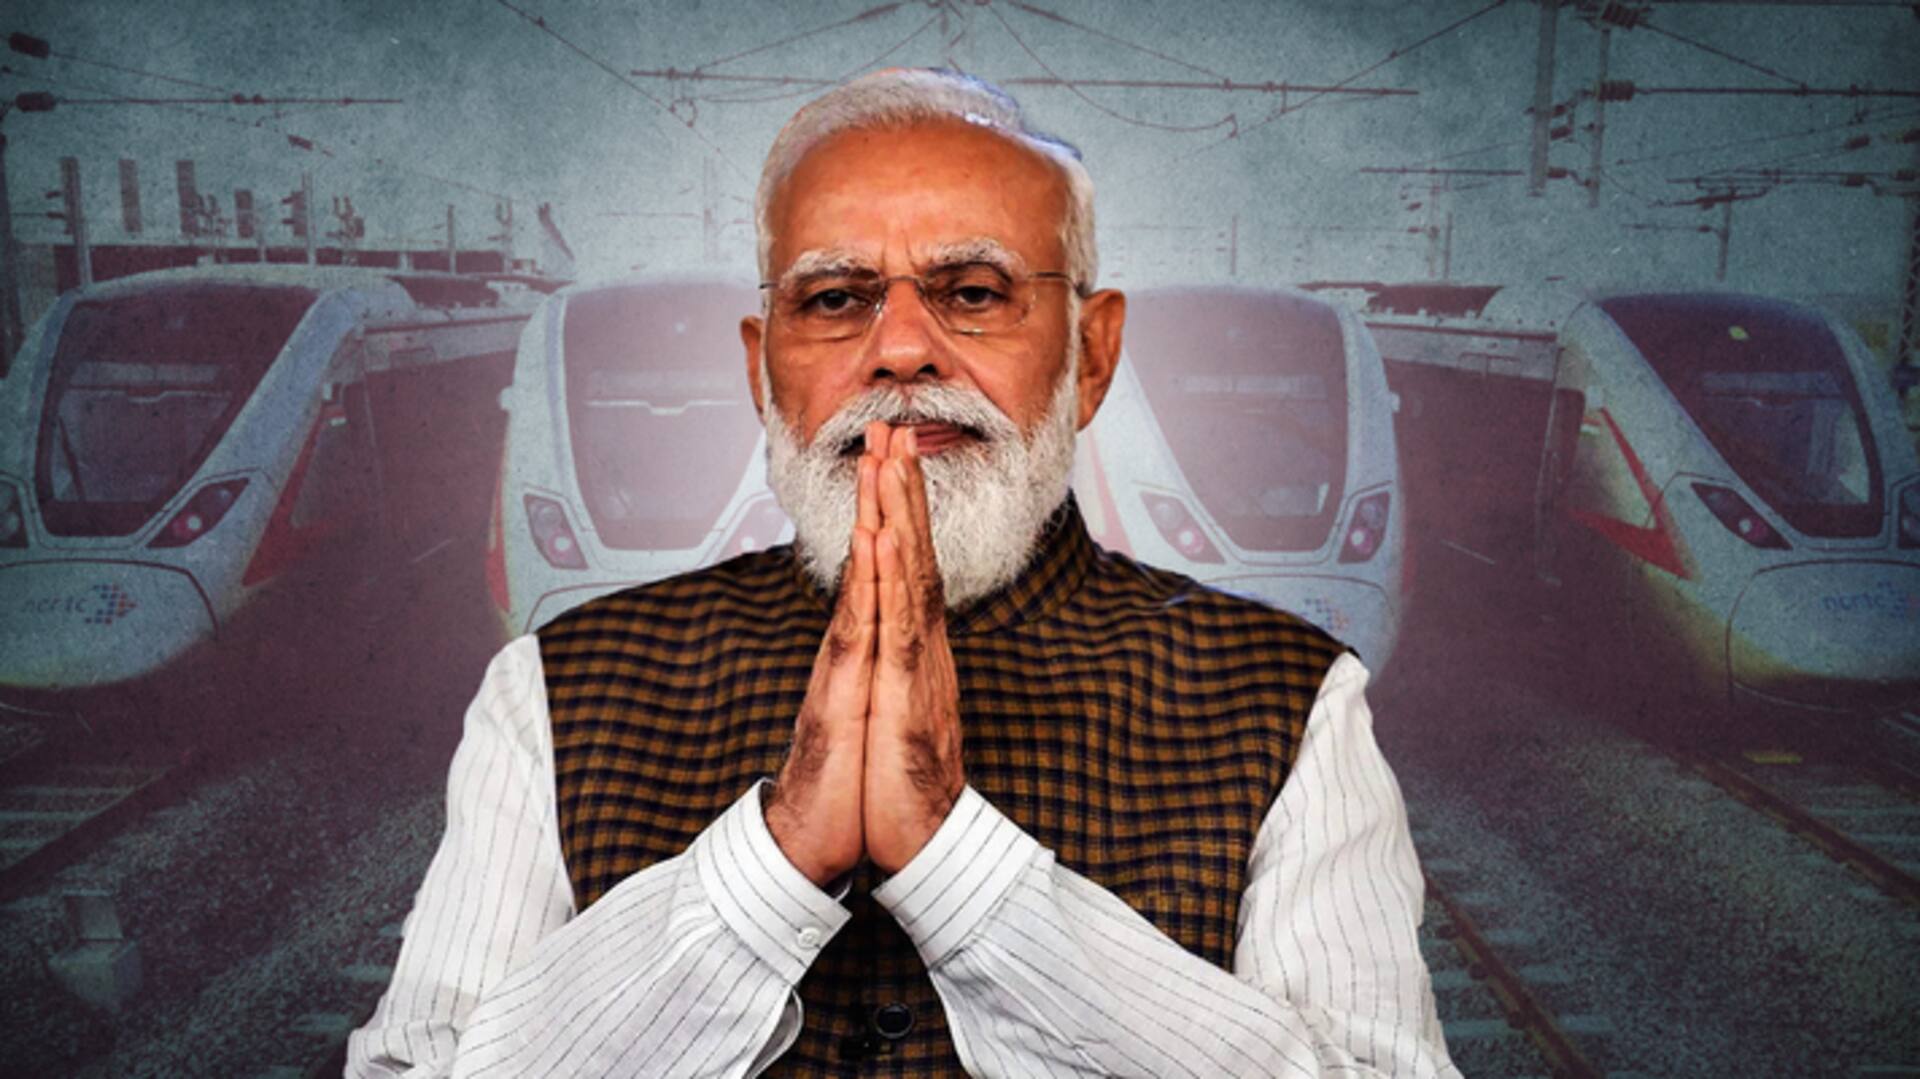 What's special about RAPIDX trains unveiled by PM Modi today